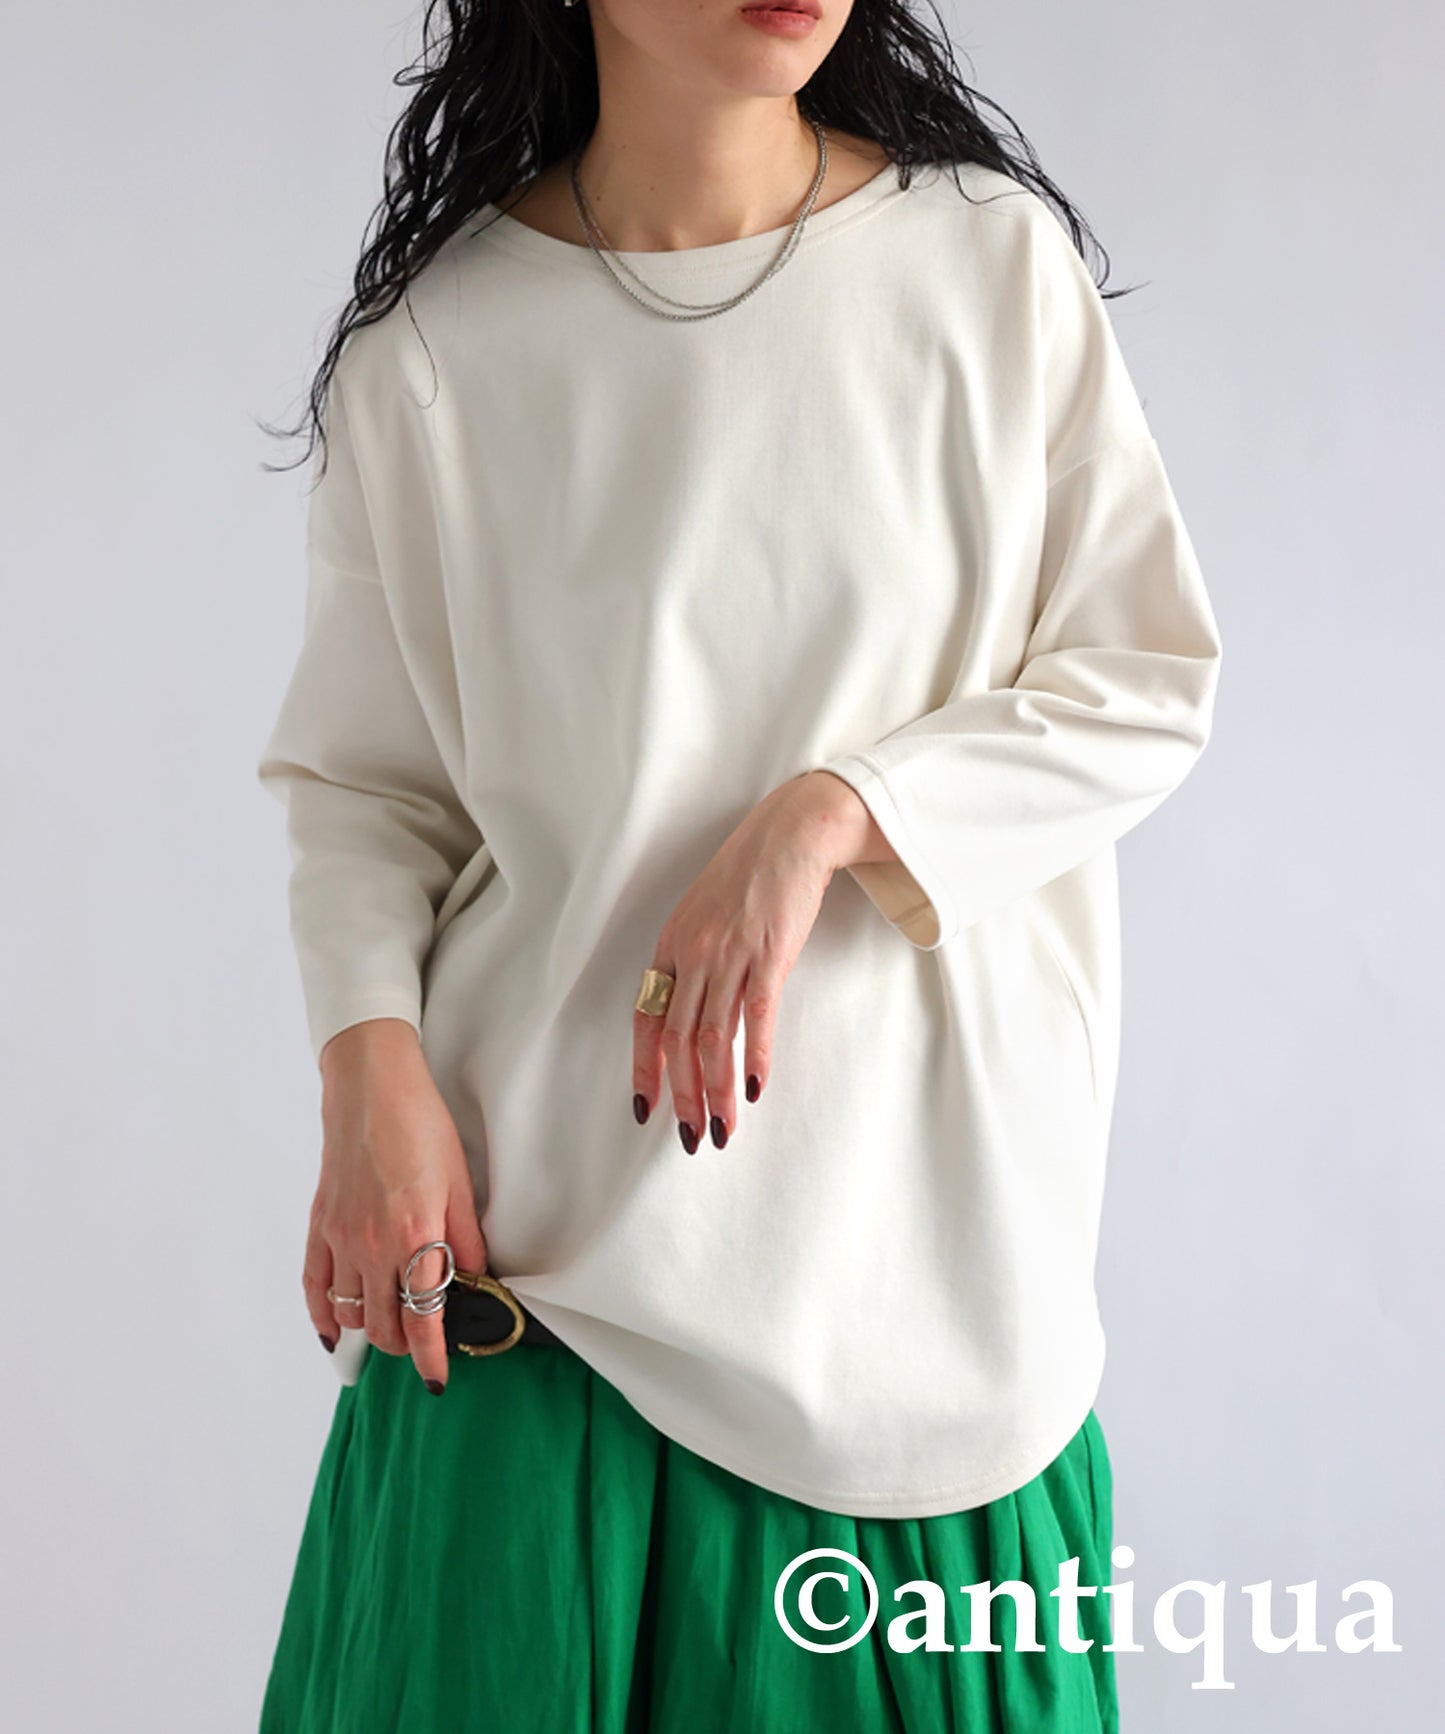 Double Knit Long Sleeve T-Shirt Ladies